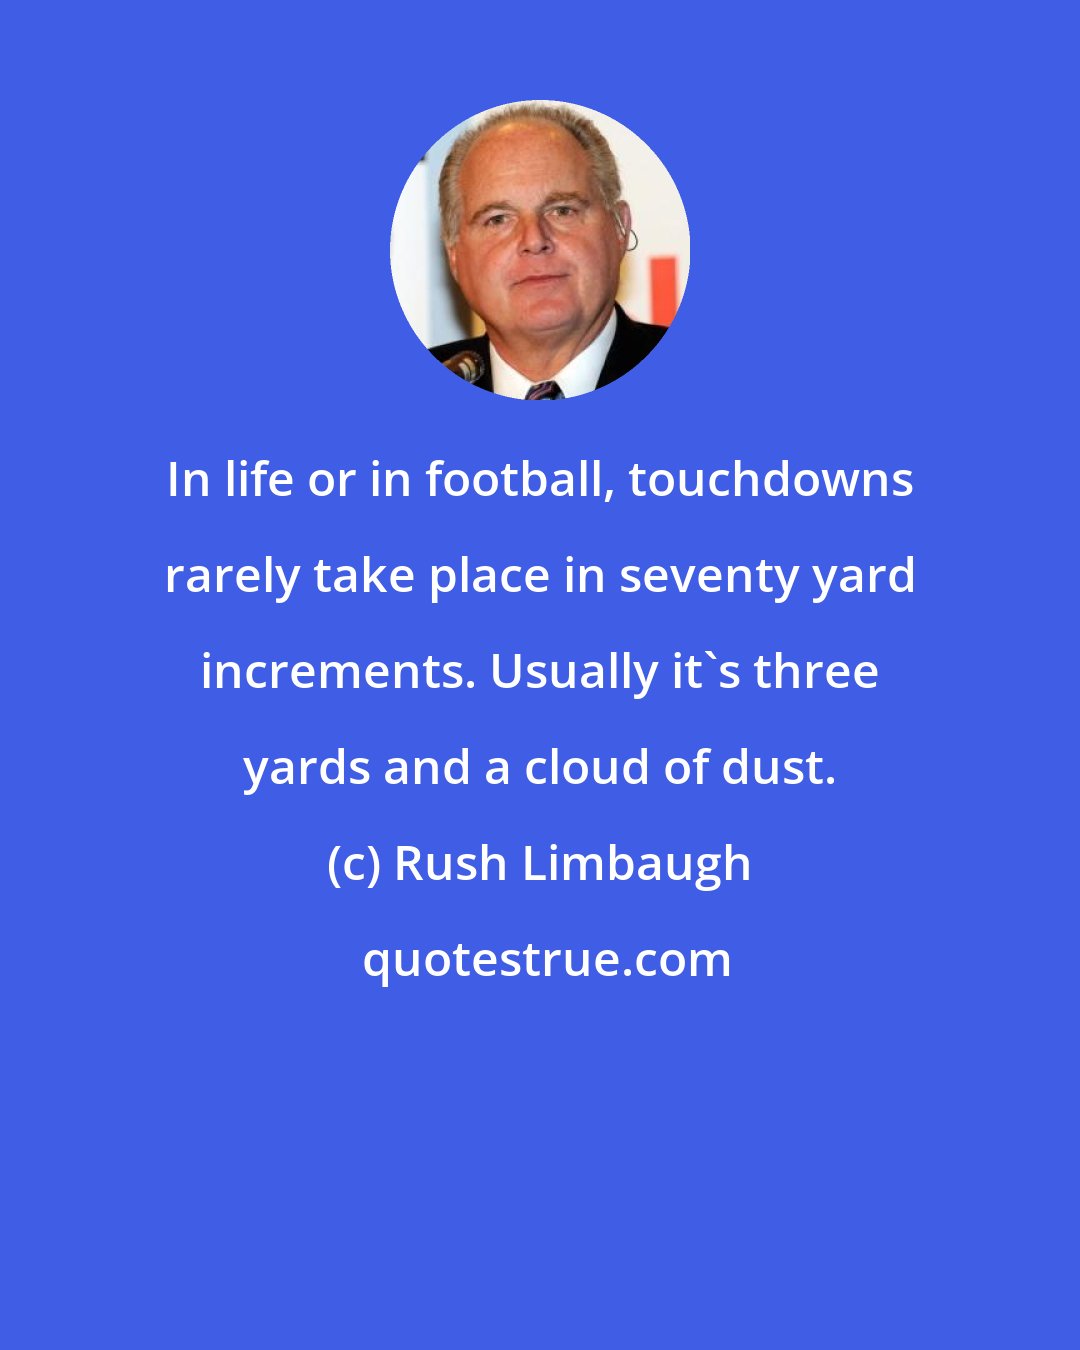 Rush Limbaugh: In life or in football, touchdowns rarely take place in seventy yard increments. Usually it's three yards and a cloud of dust.